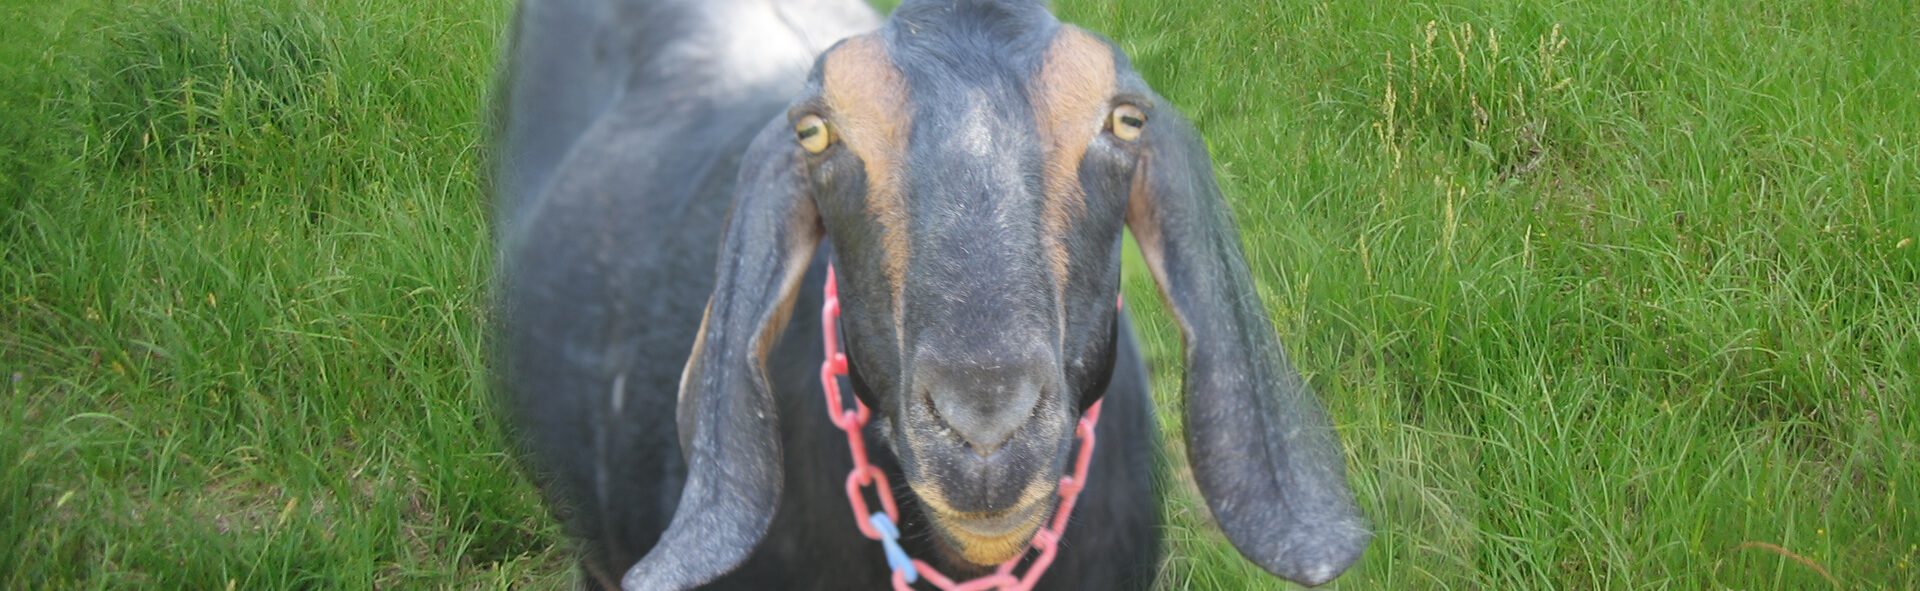 A grey goat wearing a red chain collar